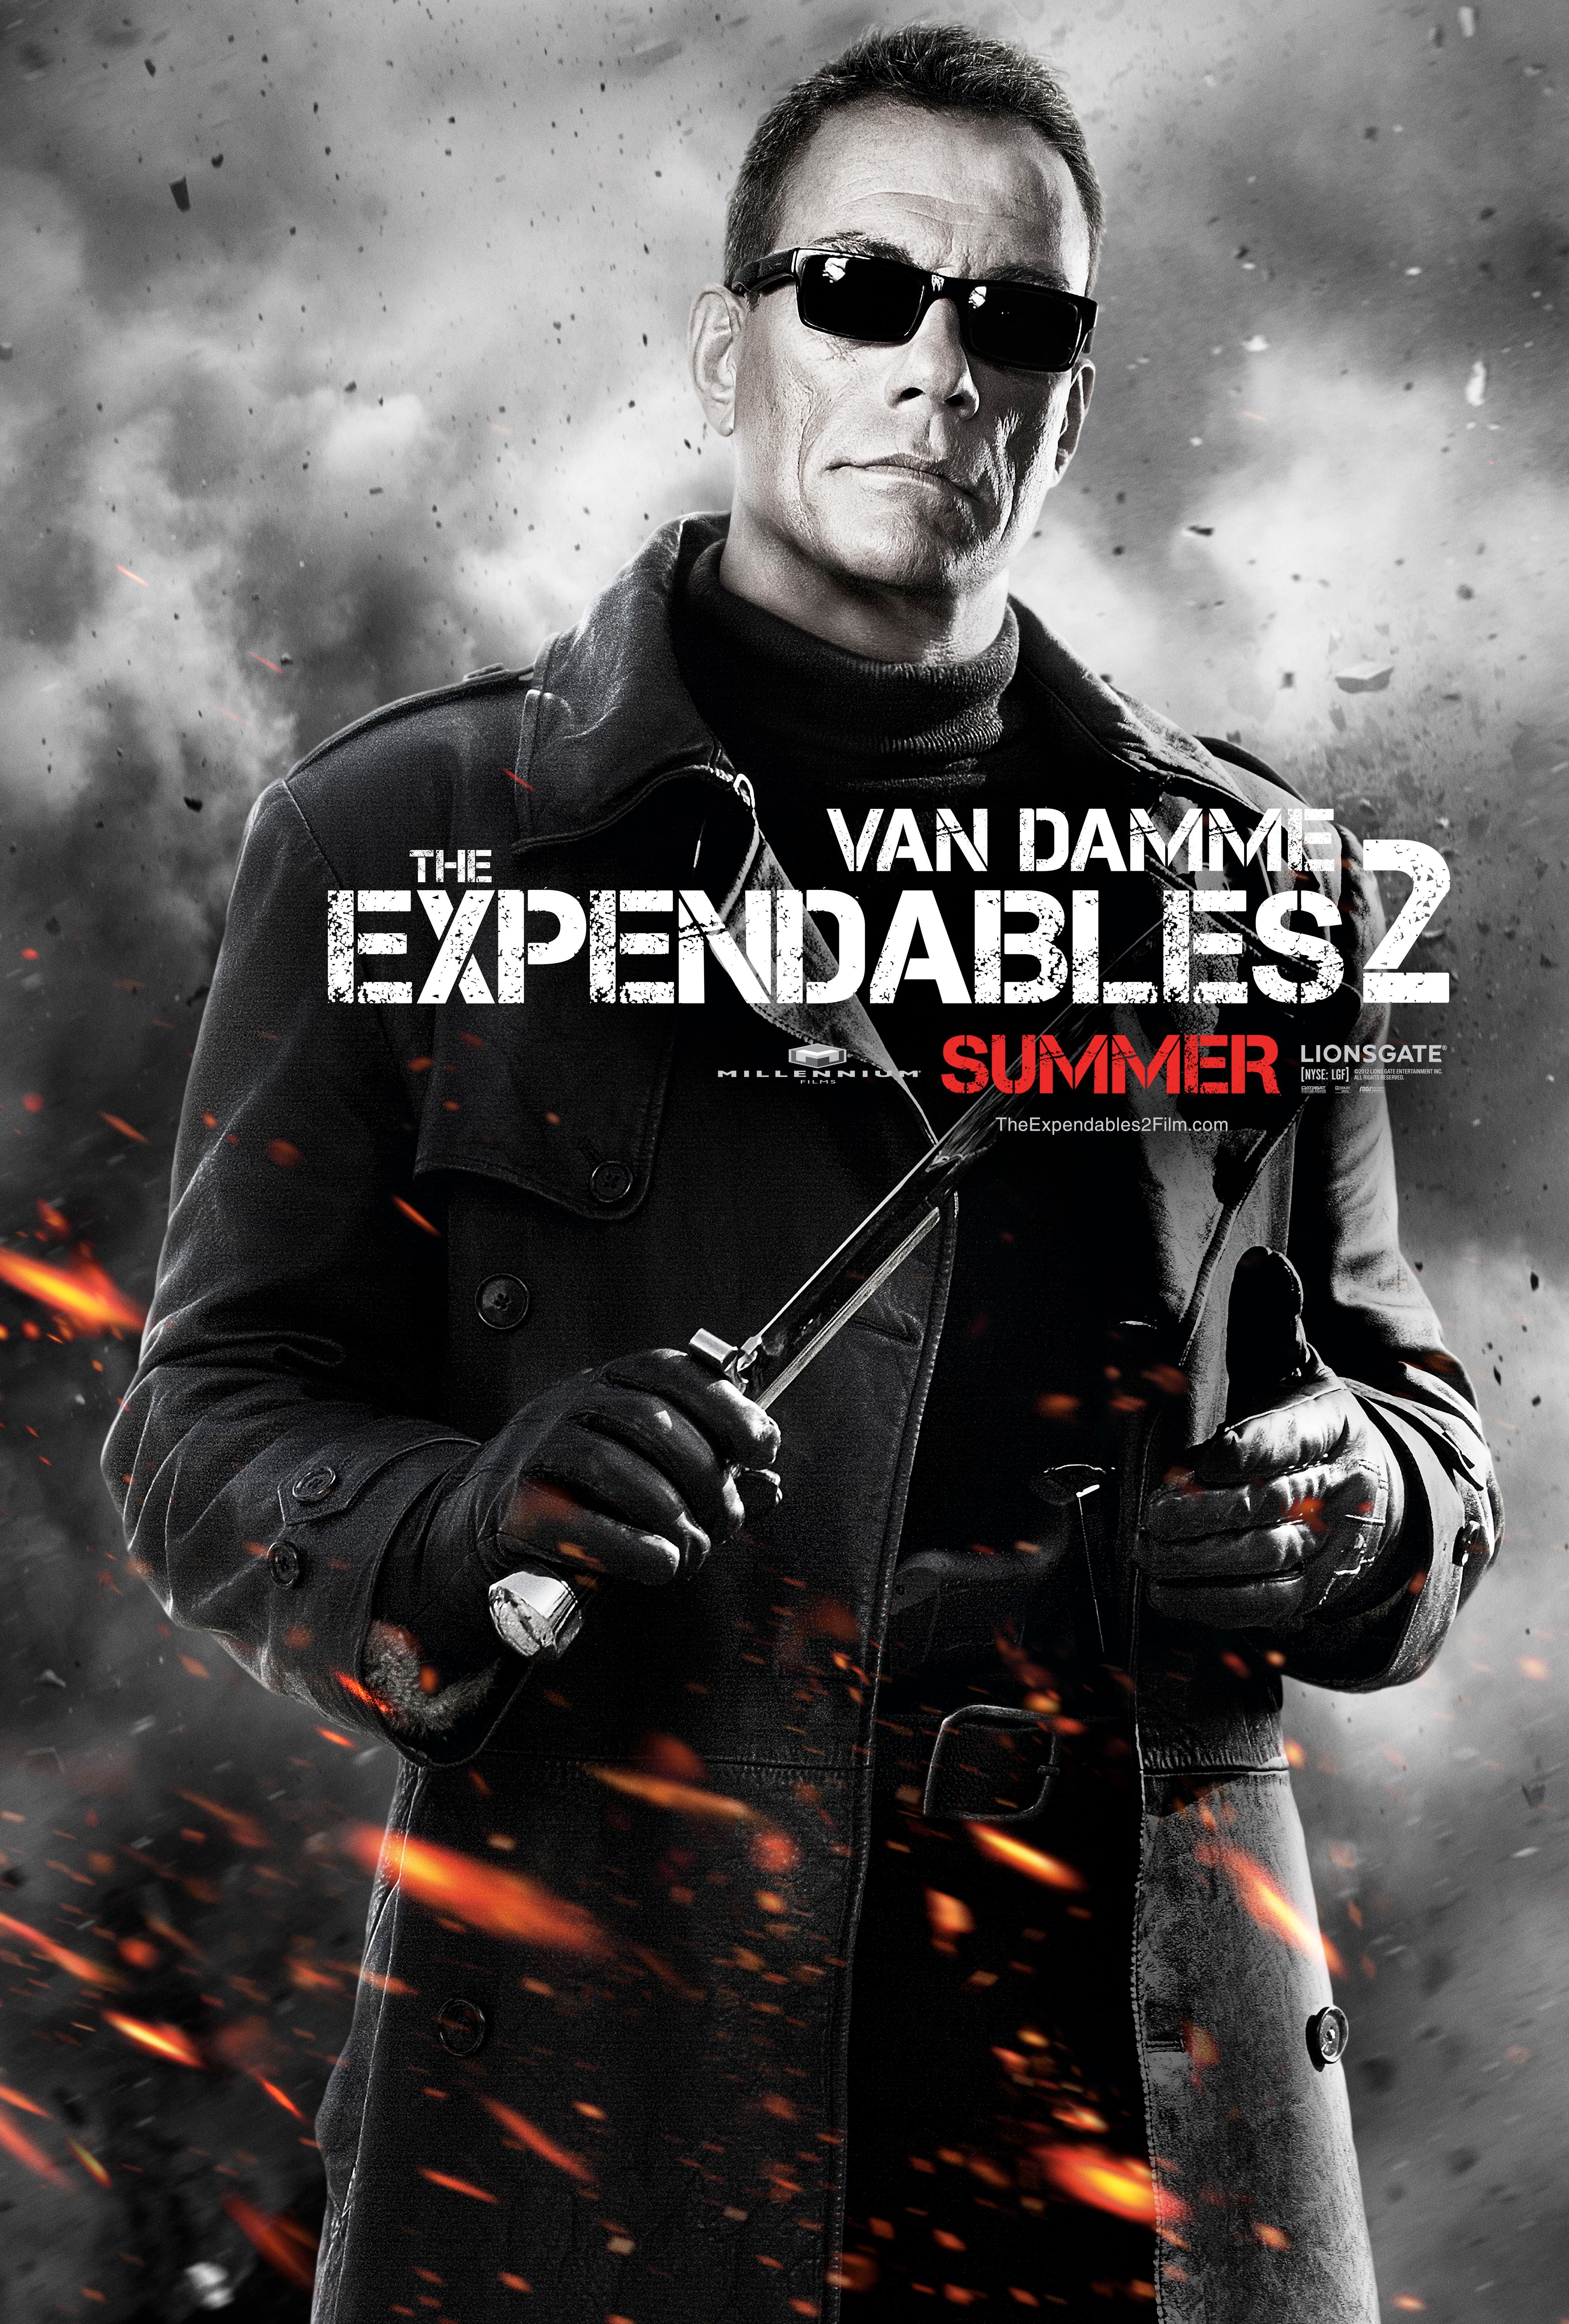 The Expendables 2 Character Poser #11